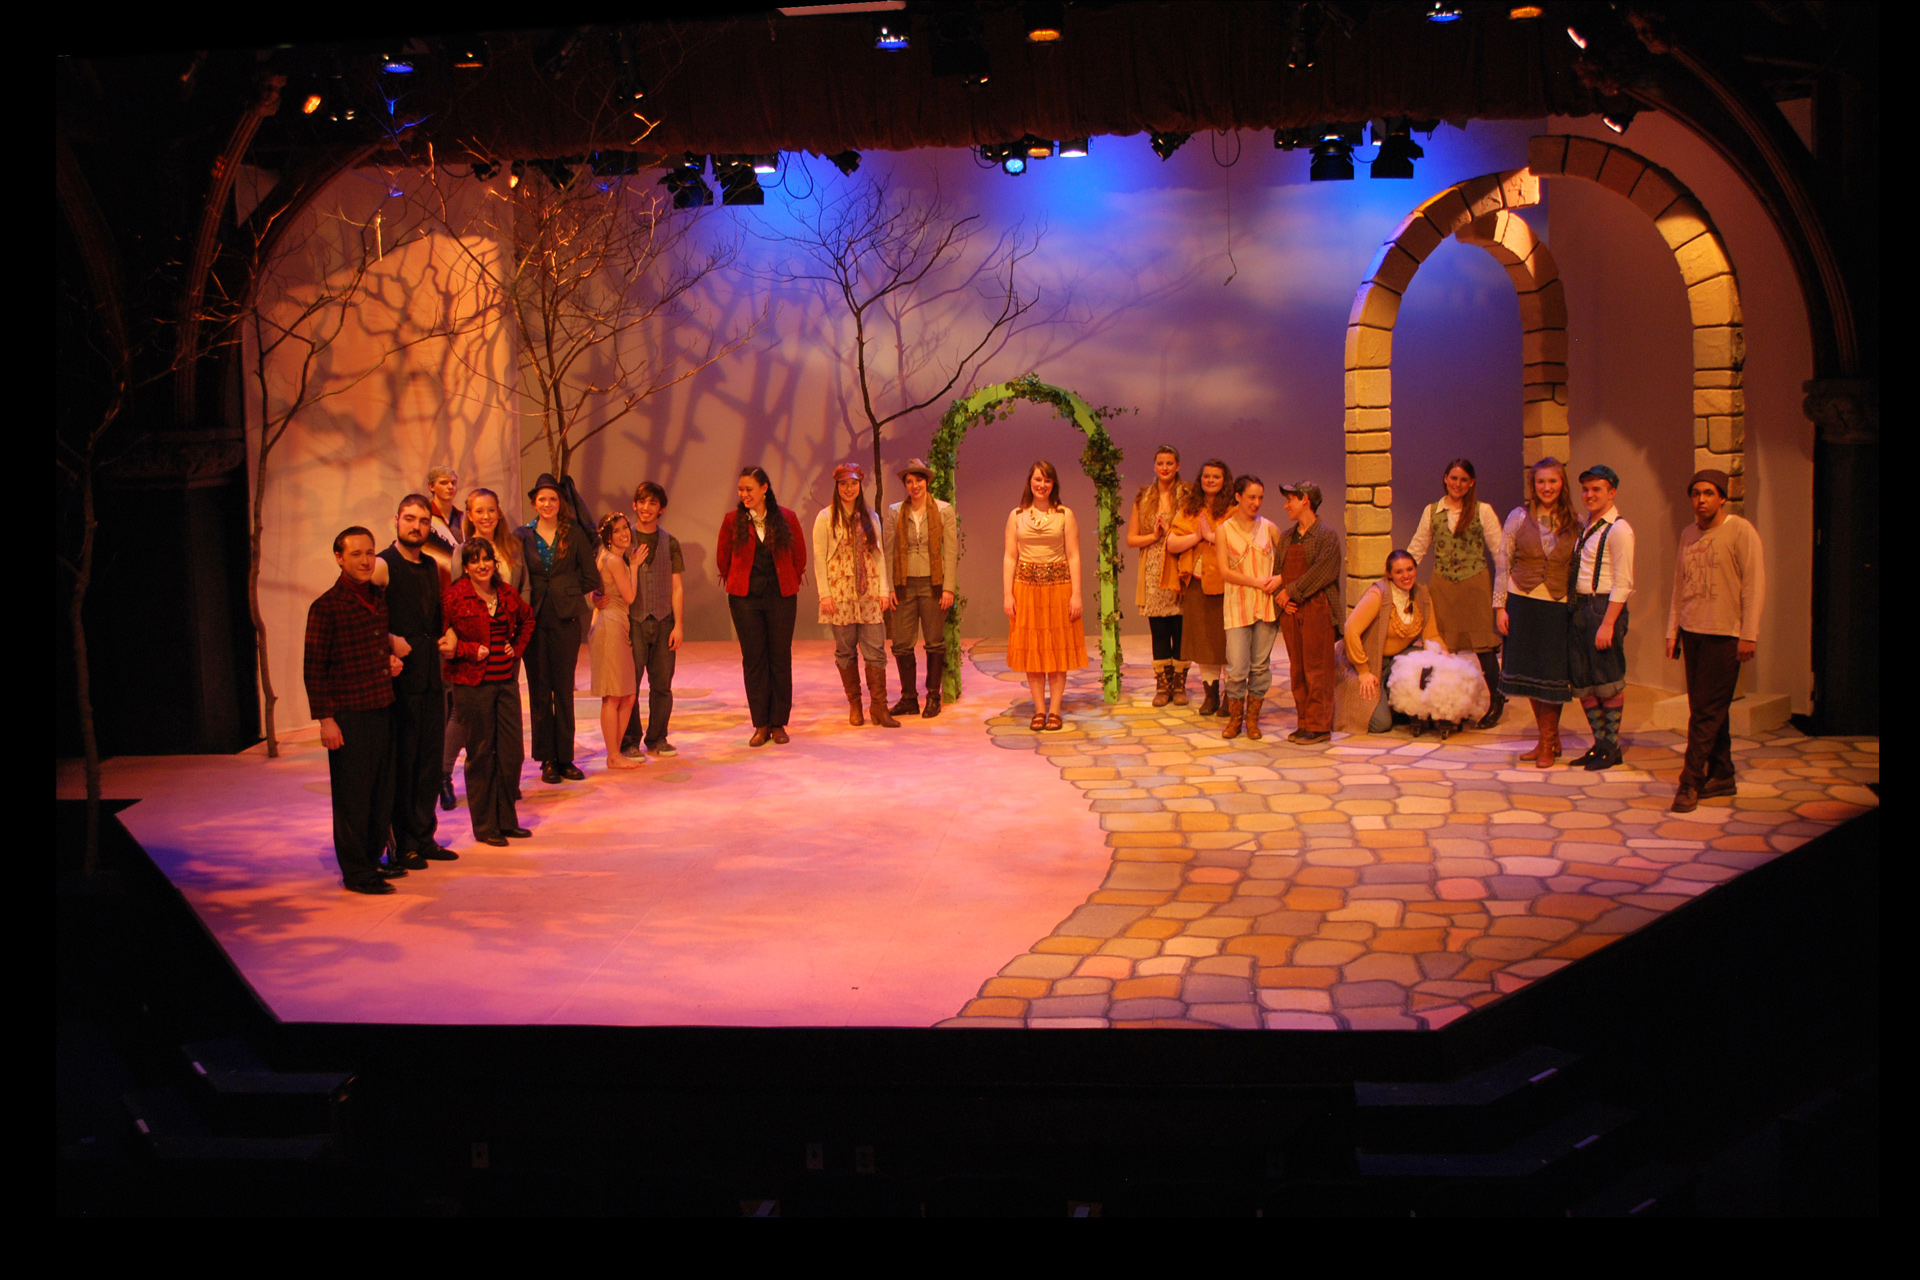 Actors and actresses in an outdoor stage setting with a stone archway